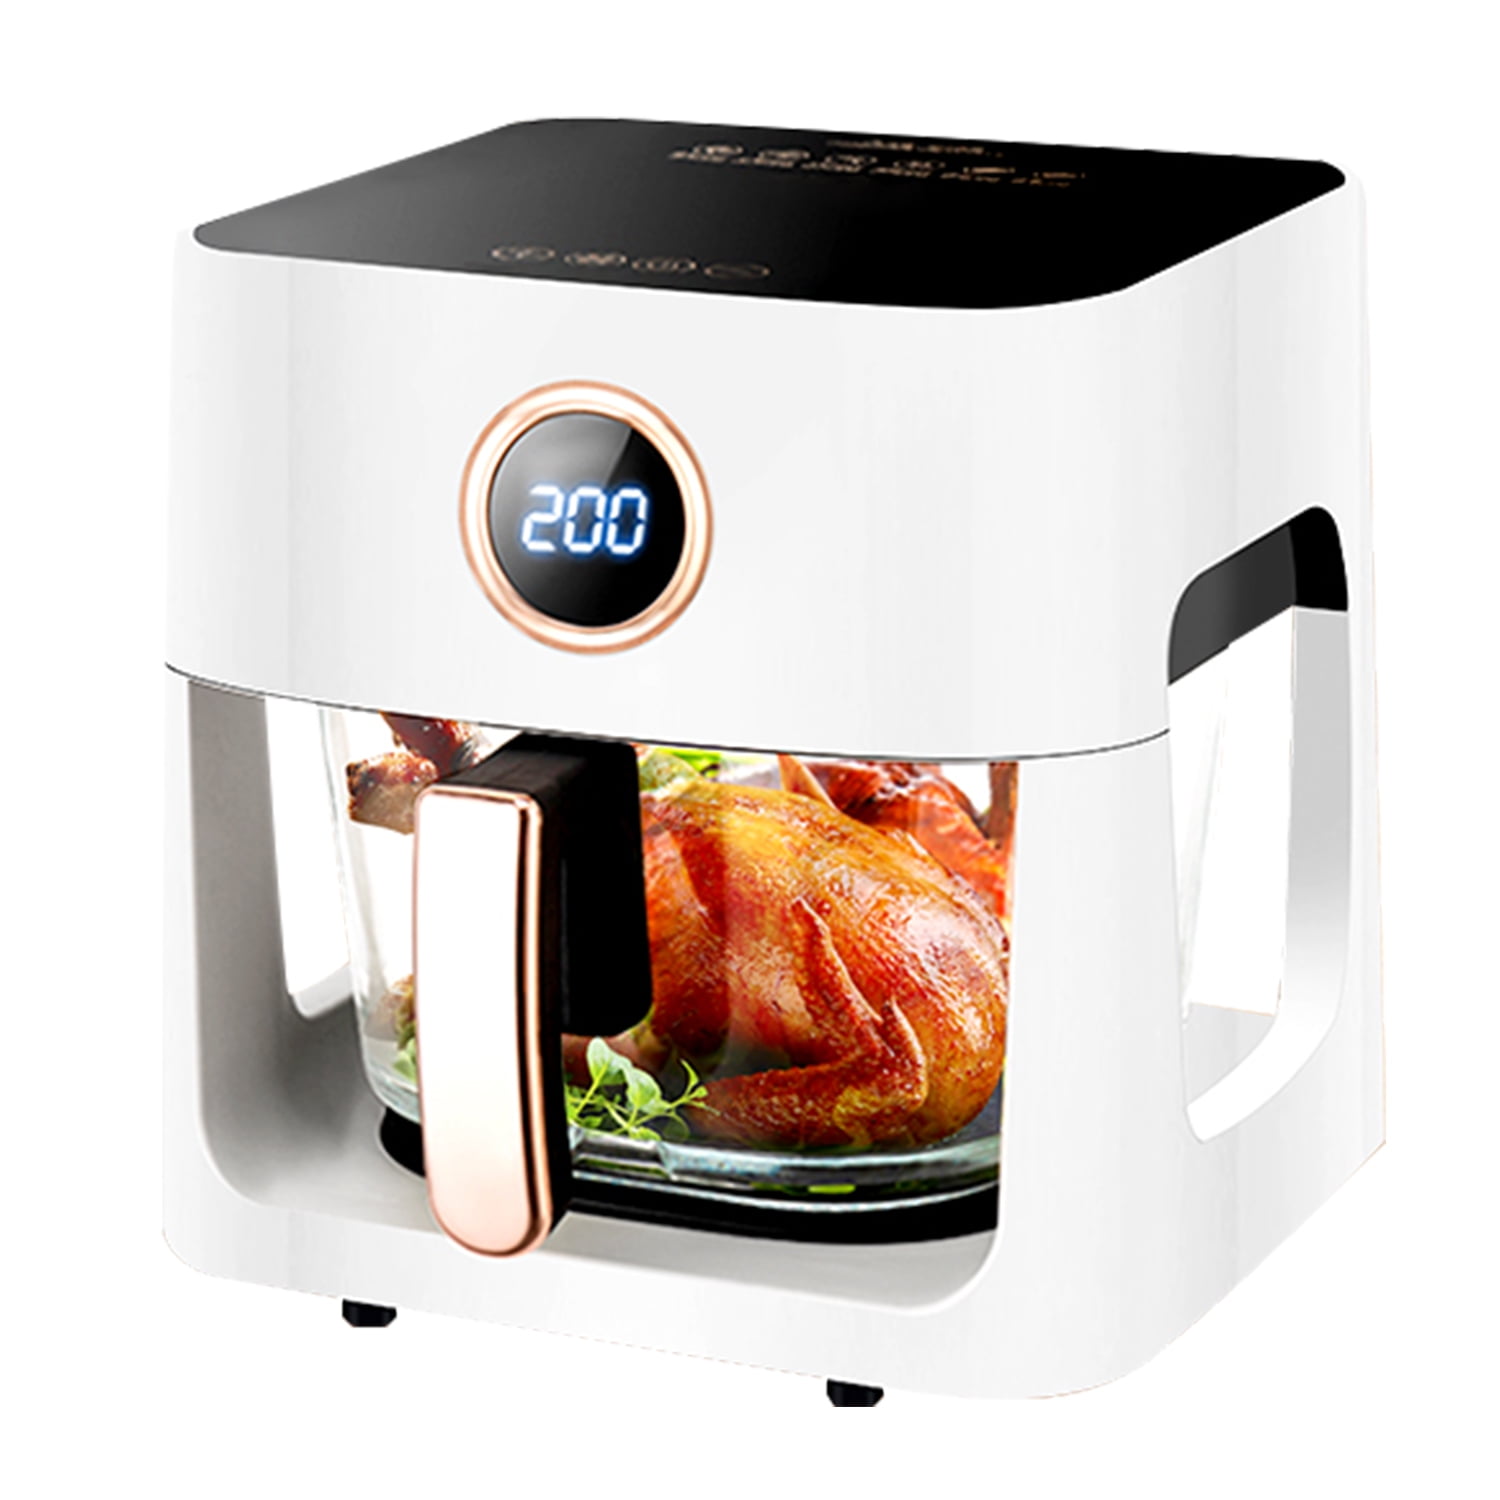 accessories fryer air gourmia - Buy accessories fryer air gourmia with free  shipping on AliExpress